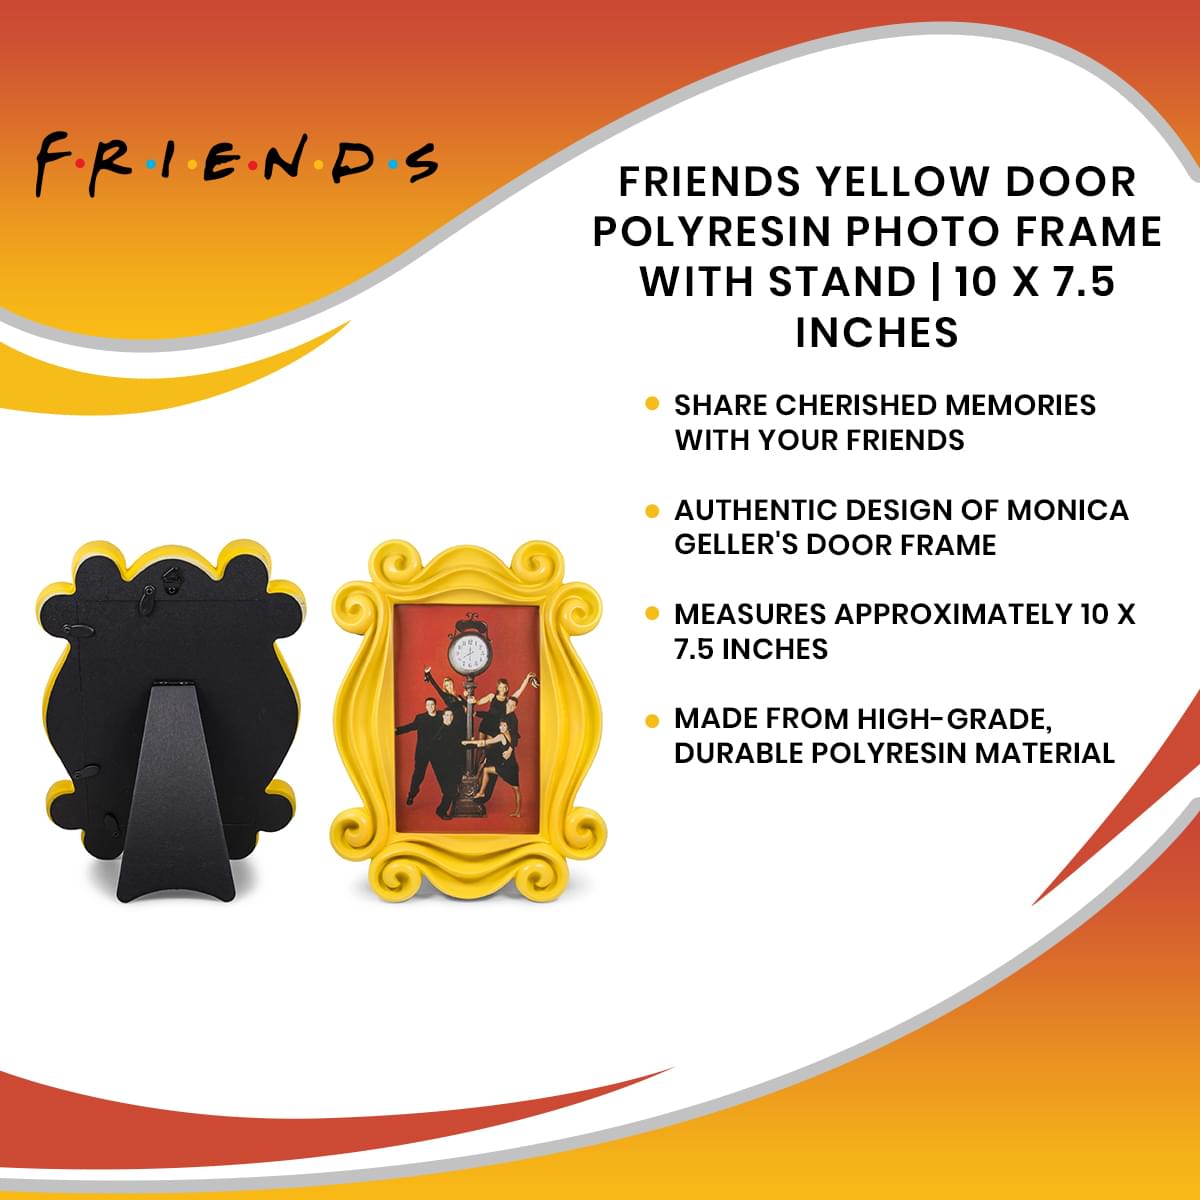 Friends Yellow Door Polyresin Photo Frame With Stand | 10 x 7.5 Inches